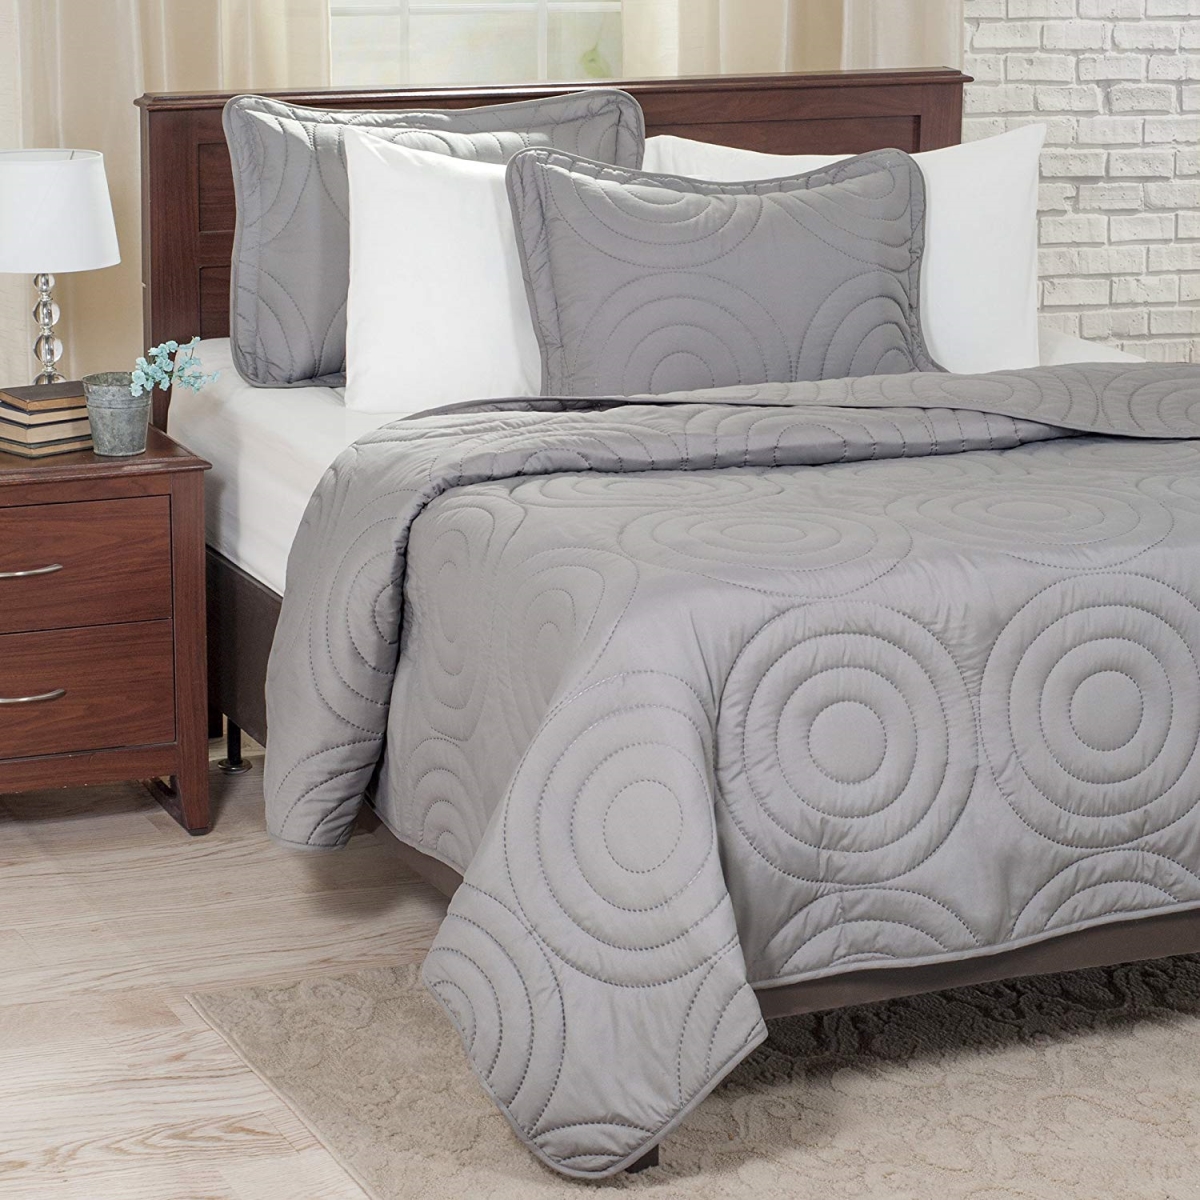 66a-01936 Solid Embossed 3 Piece Quilt Set - Full & Queen Size - Silver